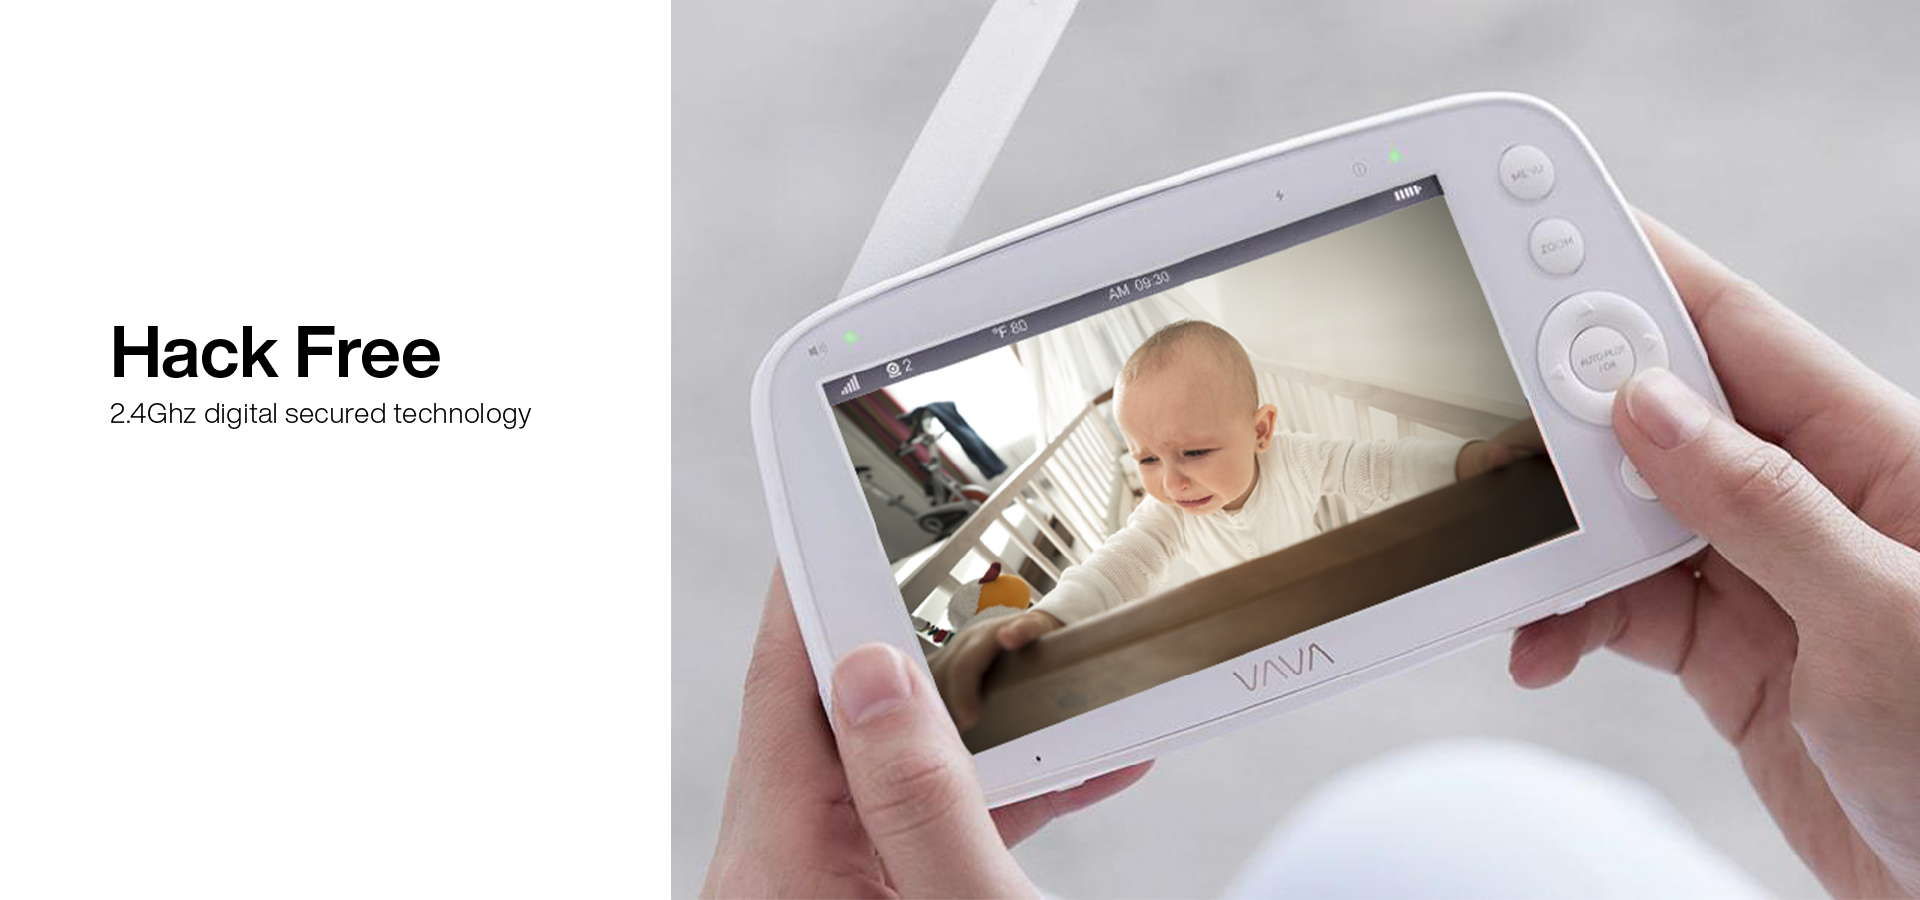 vava baby monitor is hach free